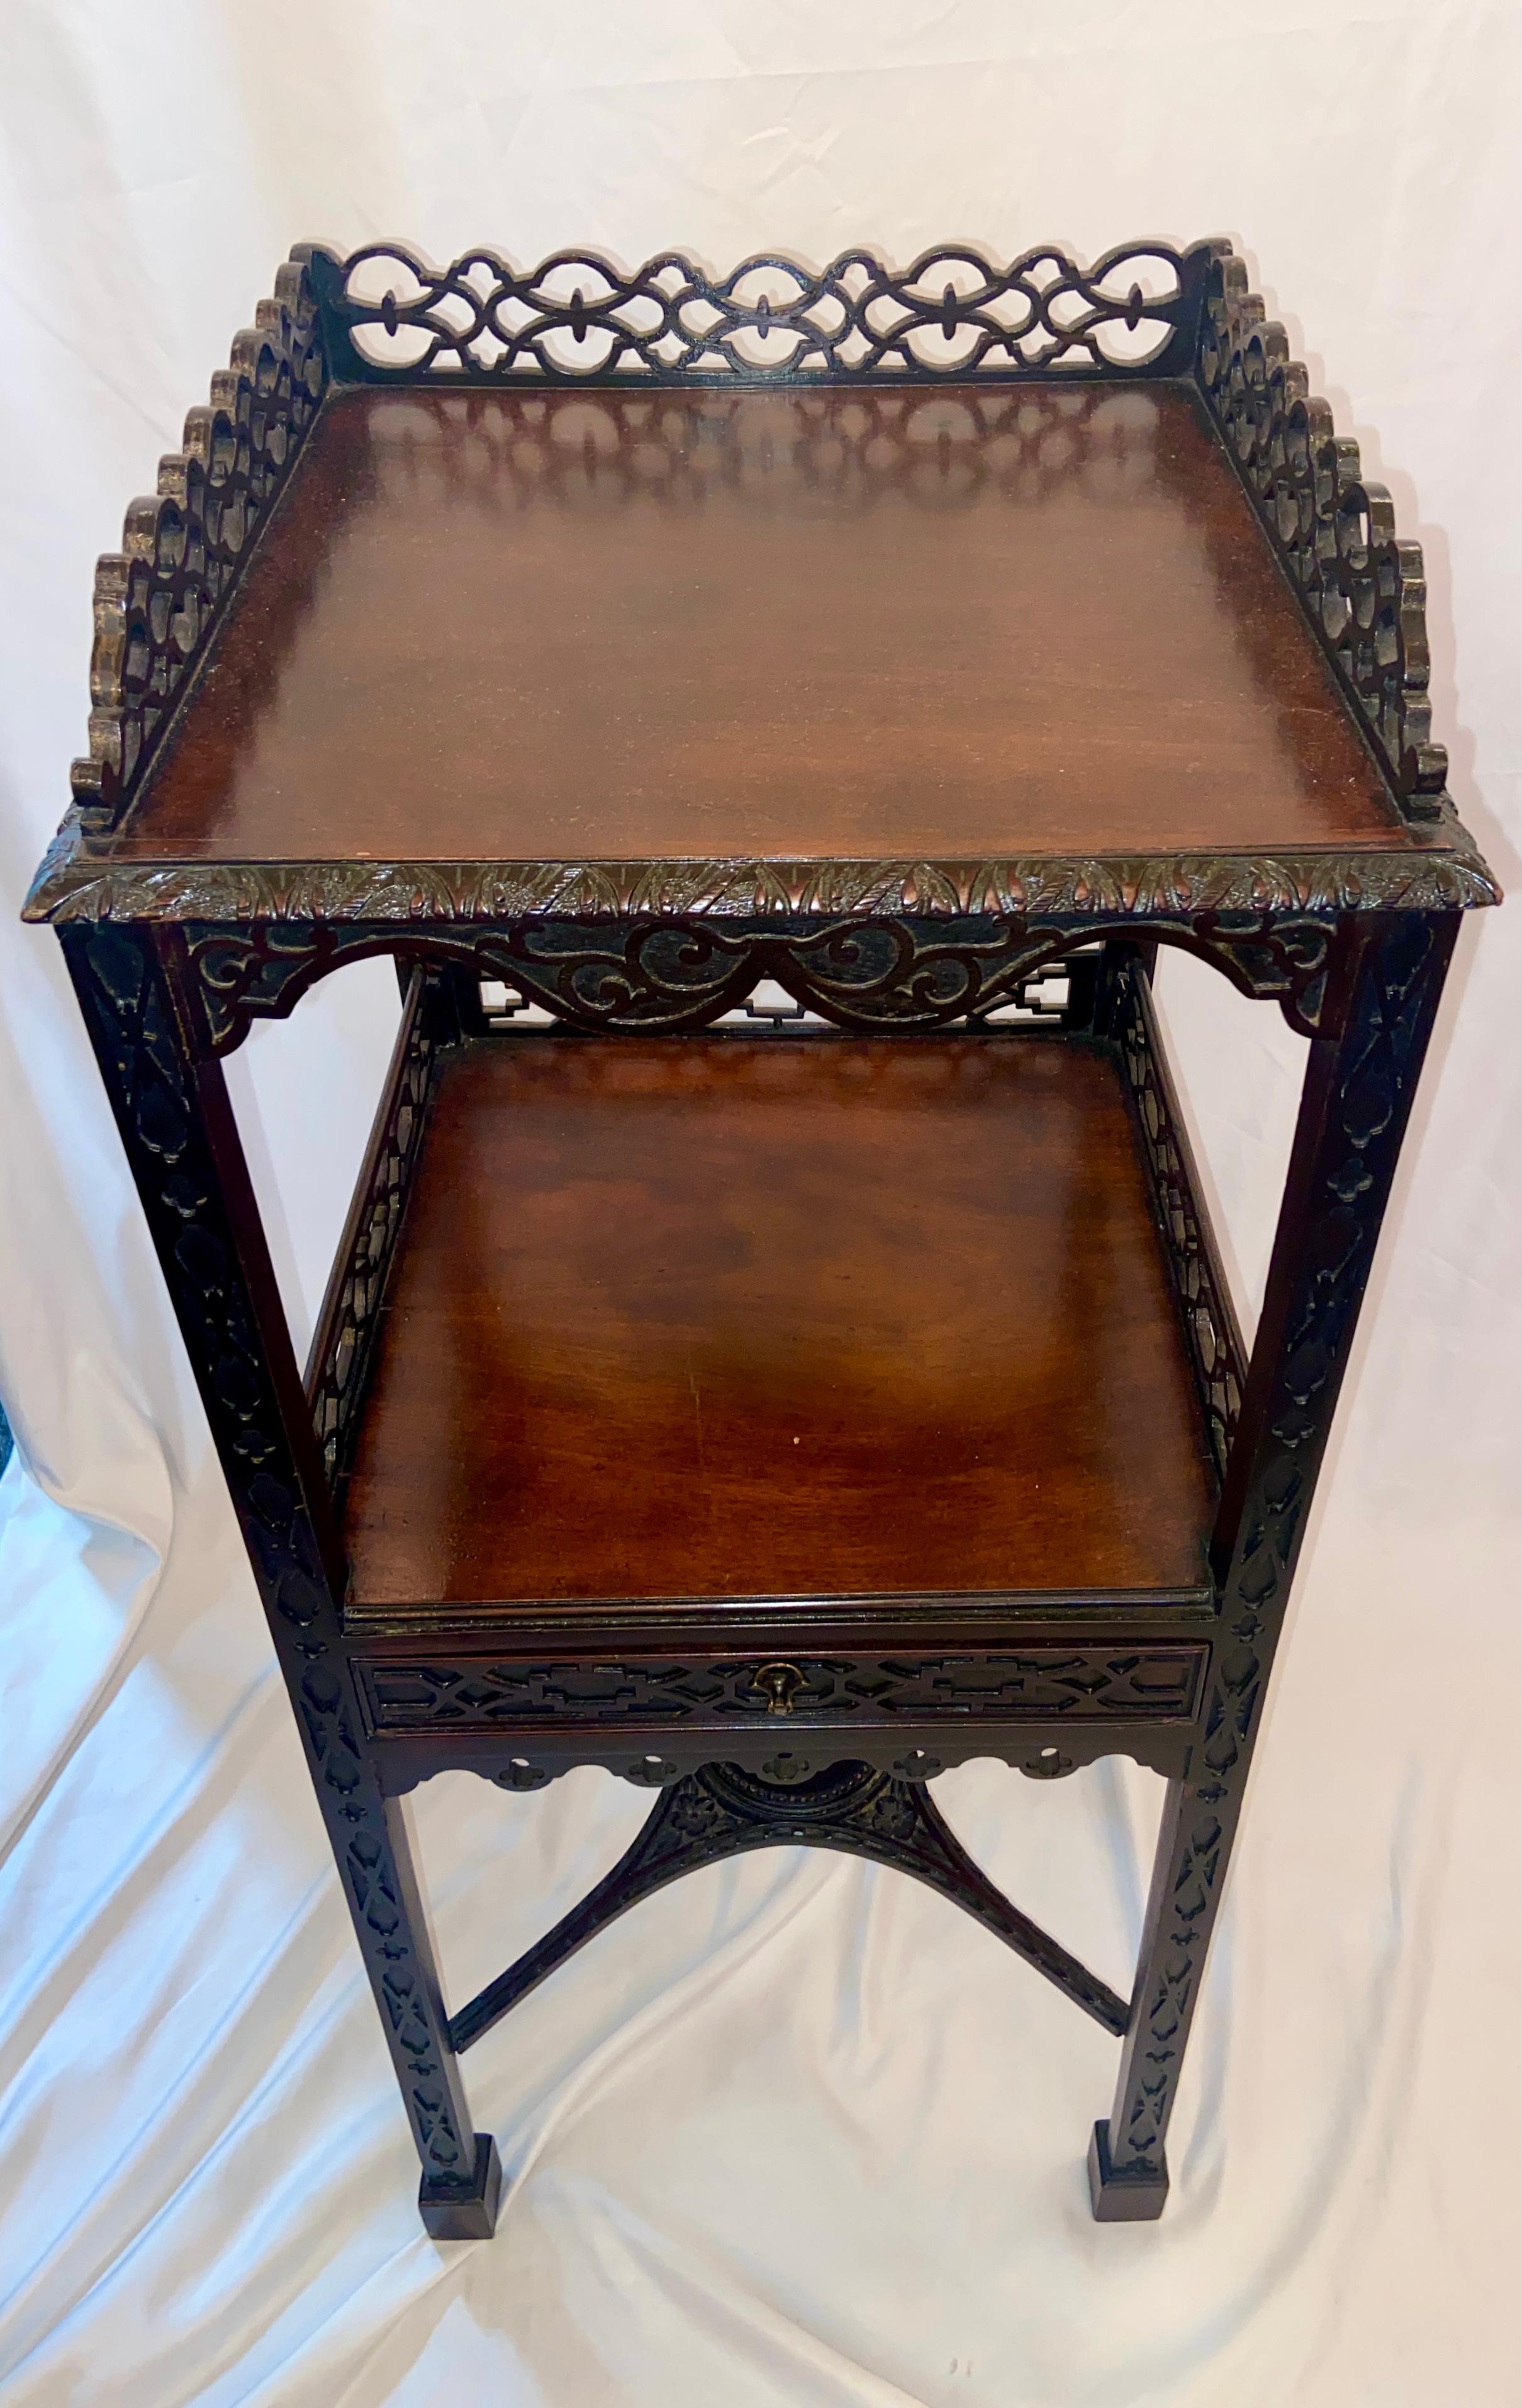 Antique English mahogany two-tier Chippendale tea table with intricate fretwork, Circa 1880.
Final photo shows the table in one of our display windows, at far right with a pretty peacock lamp on top.